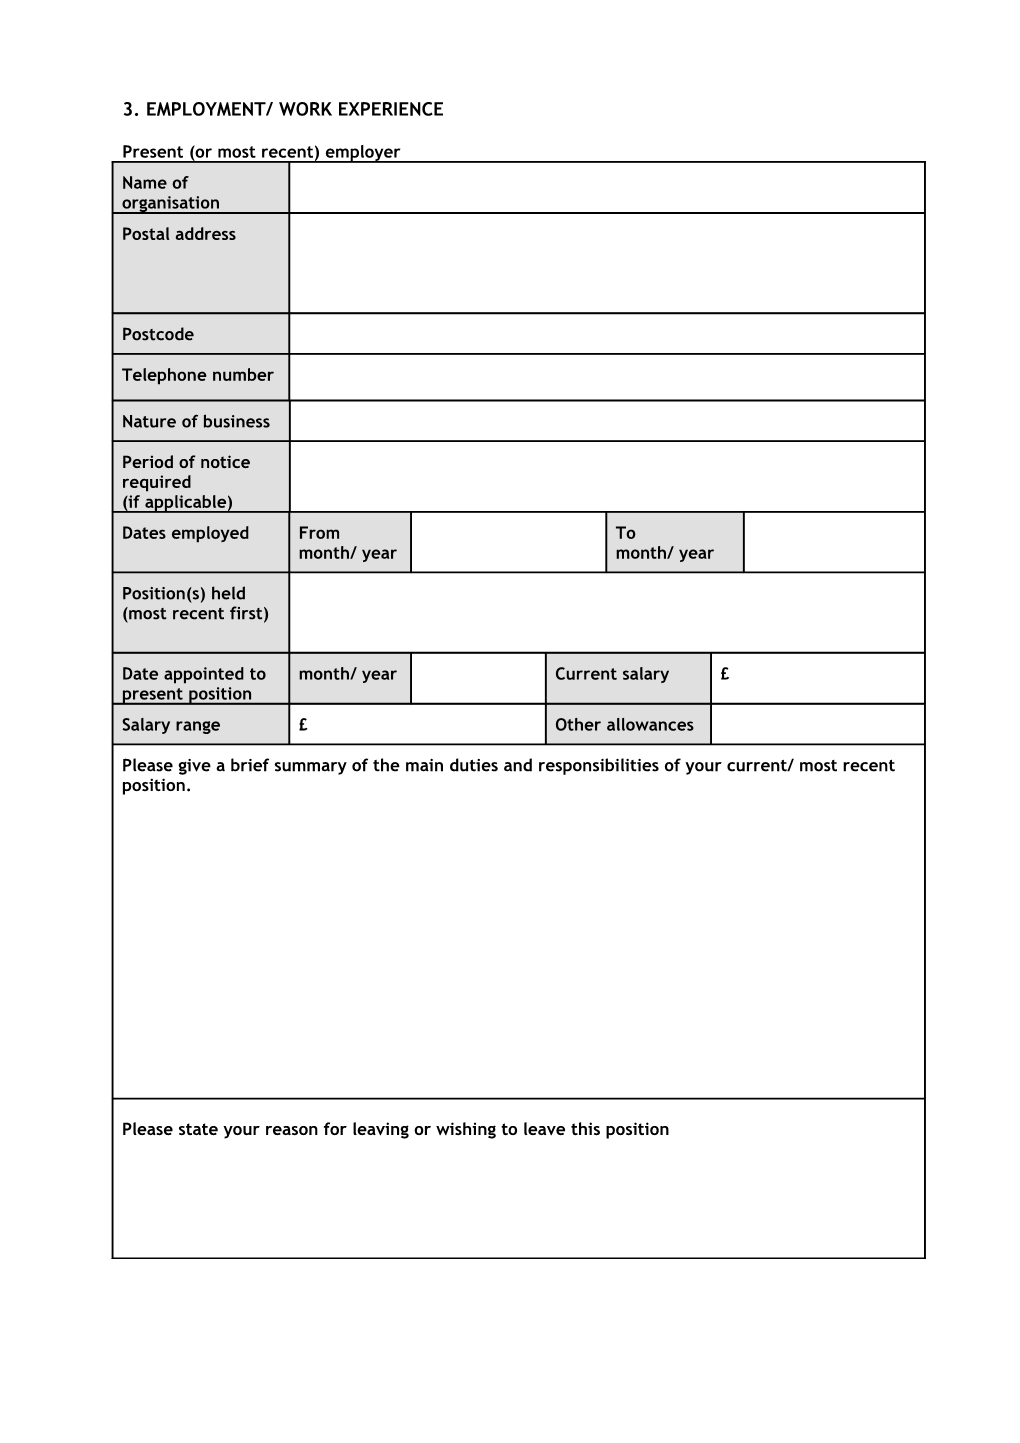 Application for Employment s192